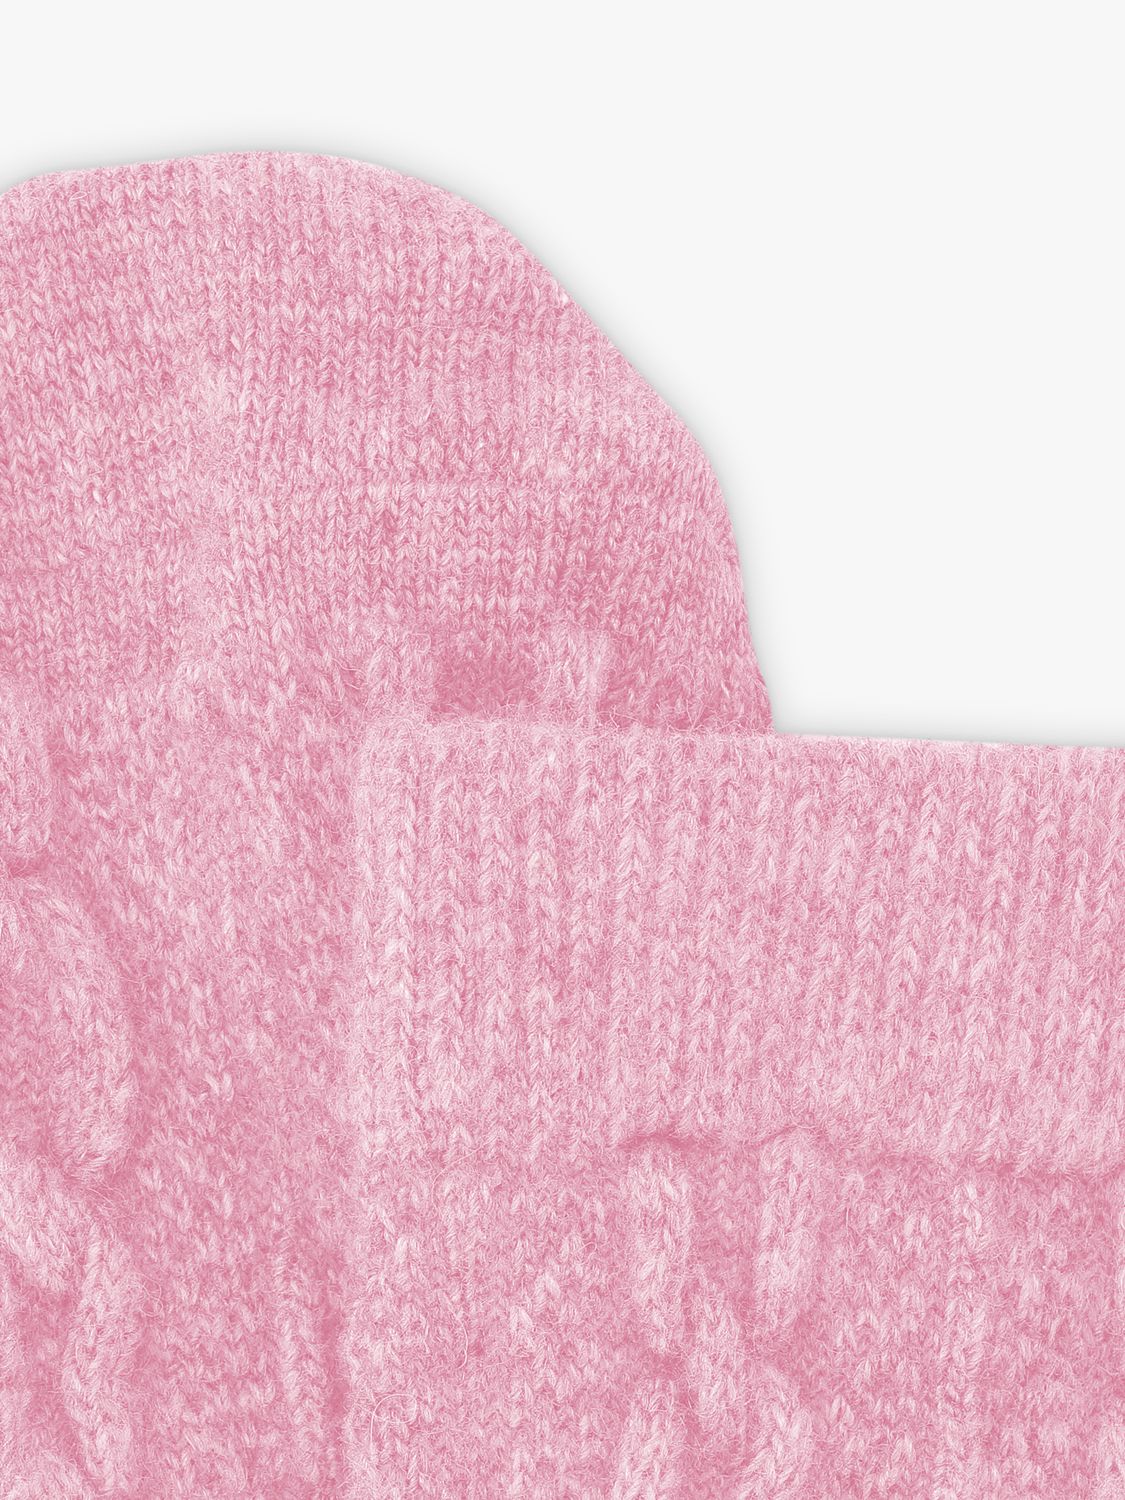 Dear Denier Saga Recycled Wool Cashmere Cable Knit Socks, Pink, 3-5.5